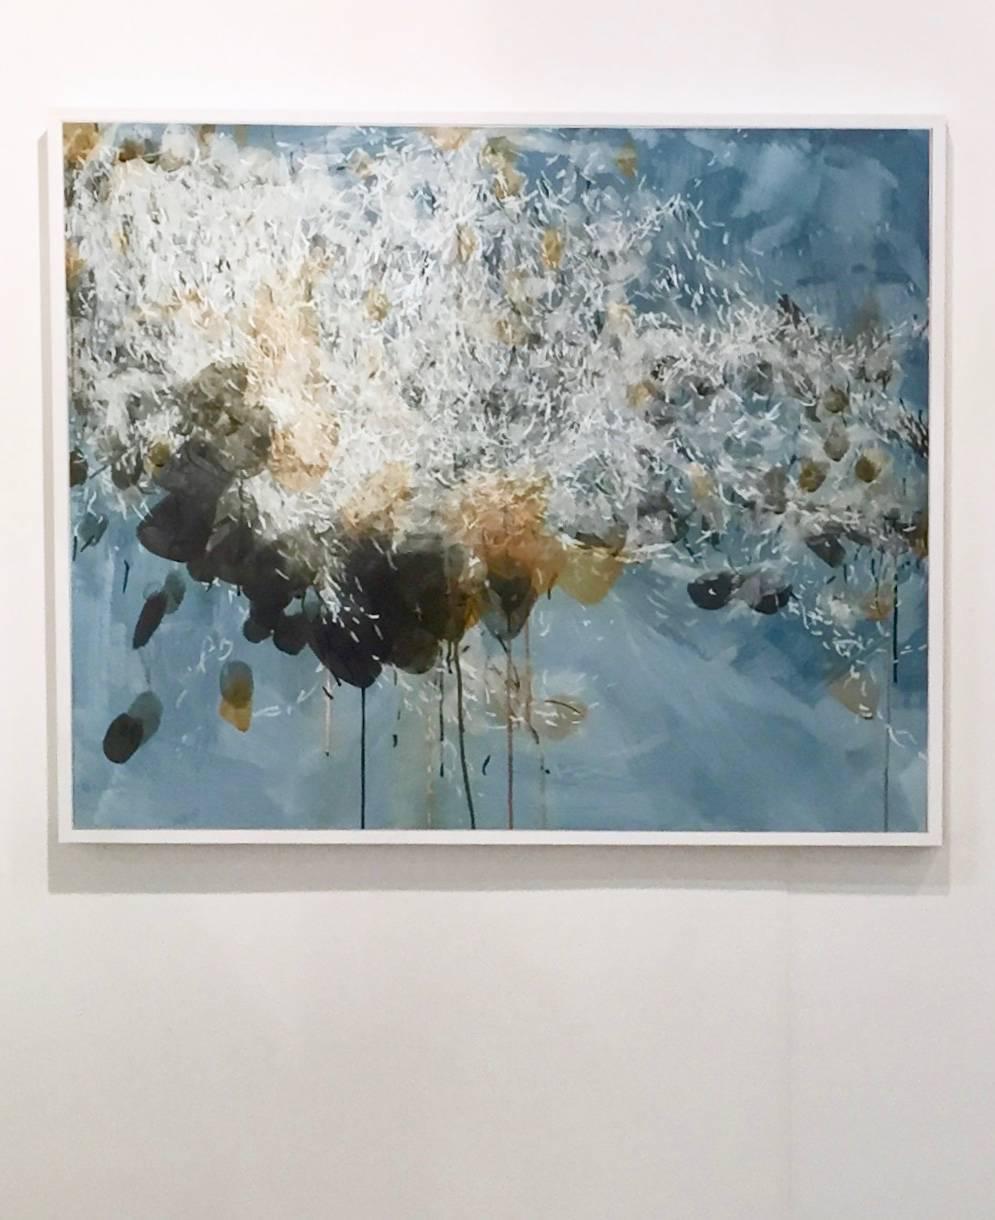 Swarm - Woodland Brown (Gran Sasso), 2017, Watercolour, ink and gesso on paper on aluminium, 33 1/2 × 40 3/5 in; 85 × 103 cm by Sara Dudman RWA

Painterly qualities and drawn marks are essential components in Sara’s work, conveying an intuitive